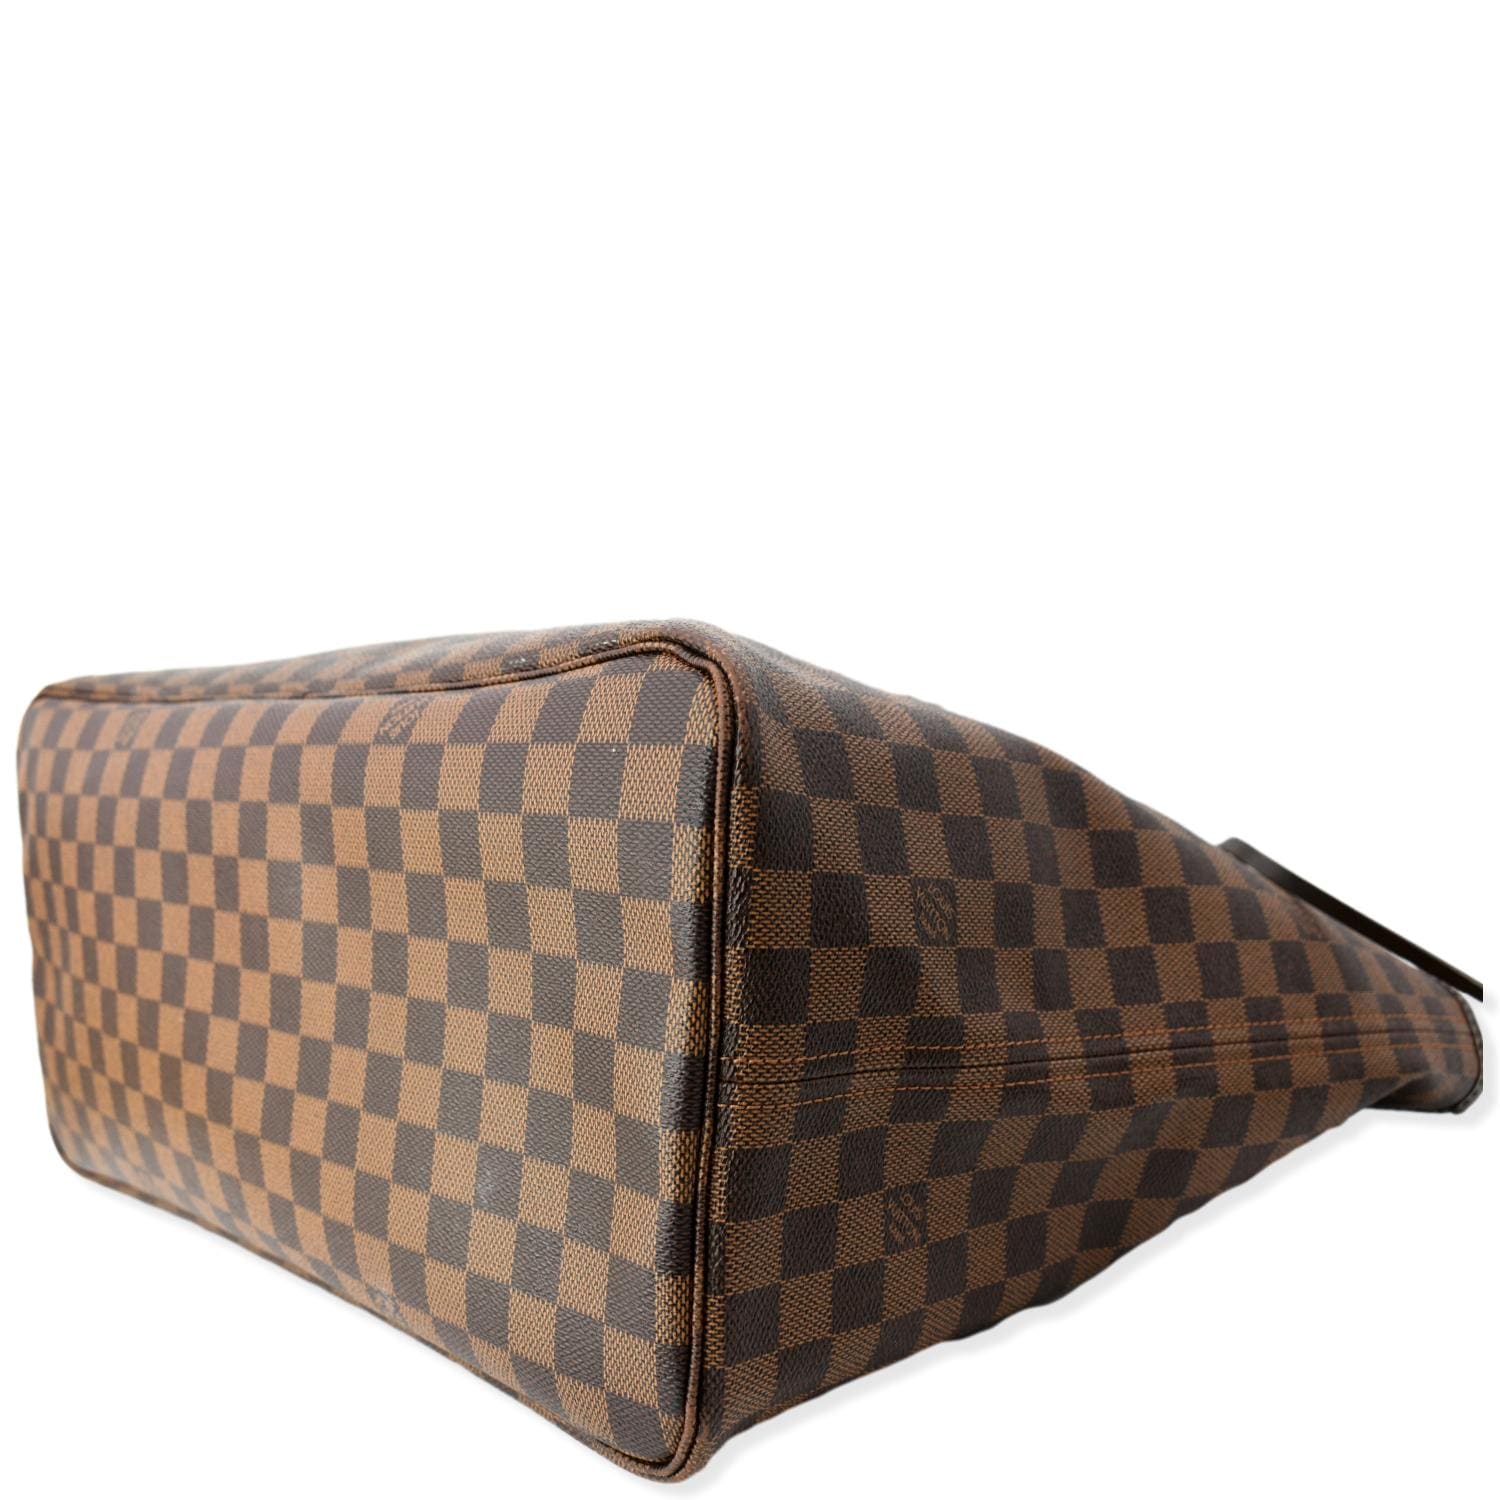 LOUIS VUITTON Damier Neverfull MM Tote 2014